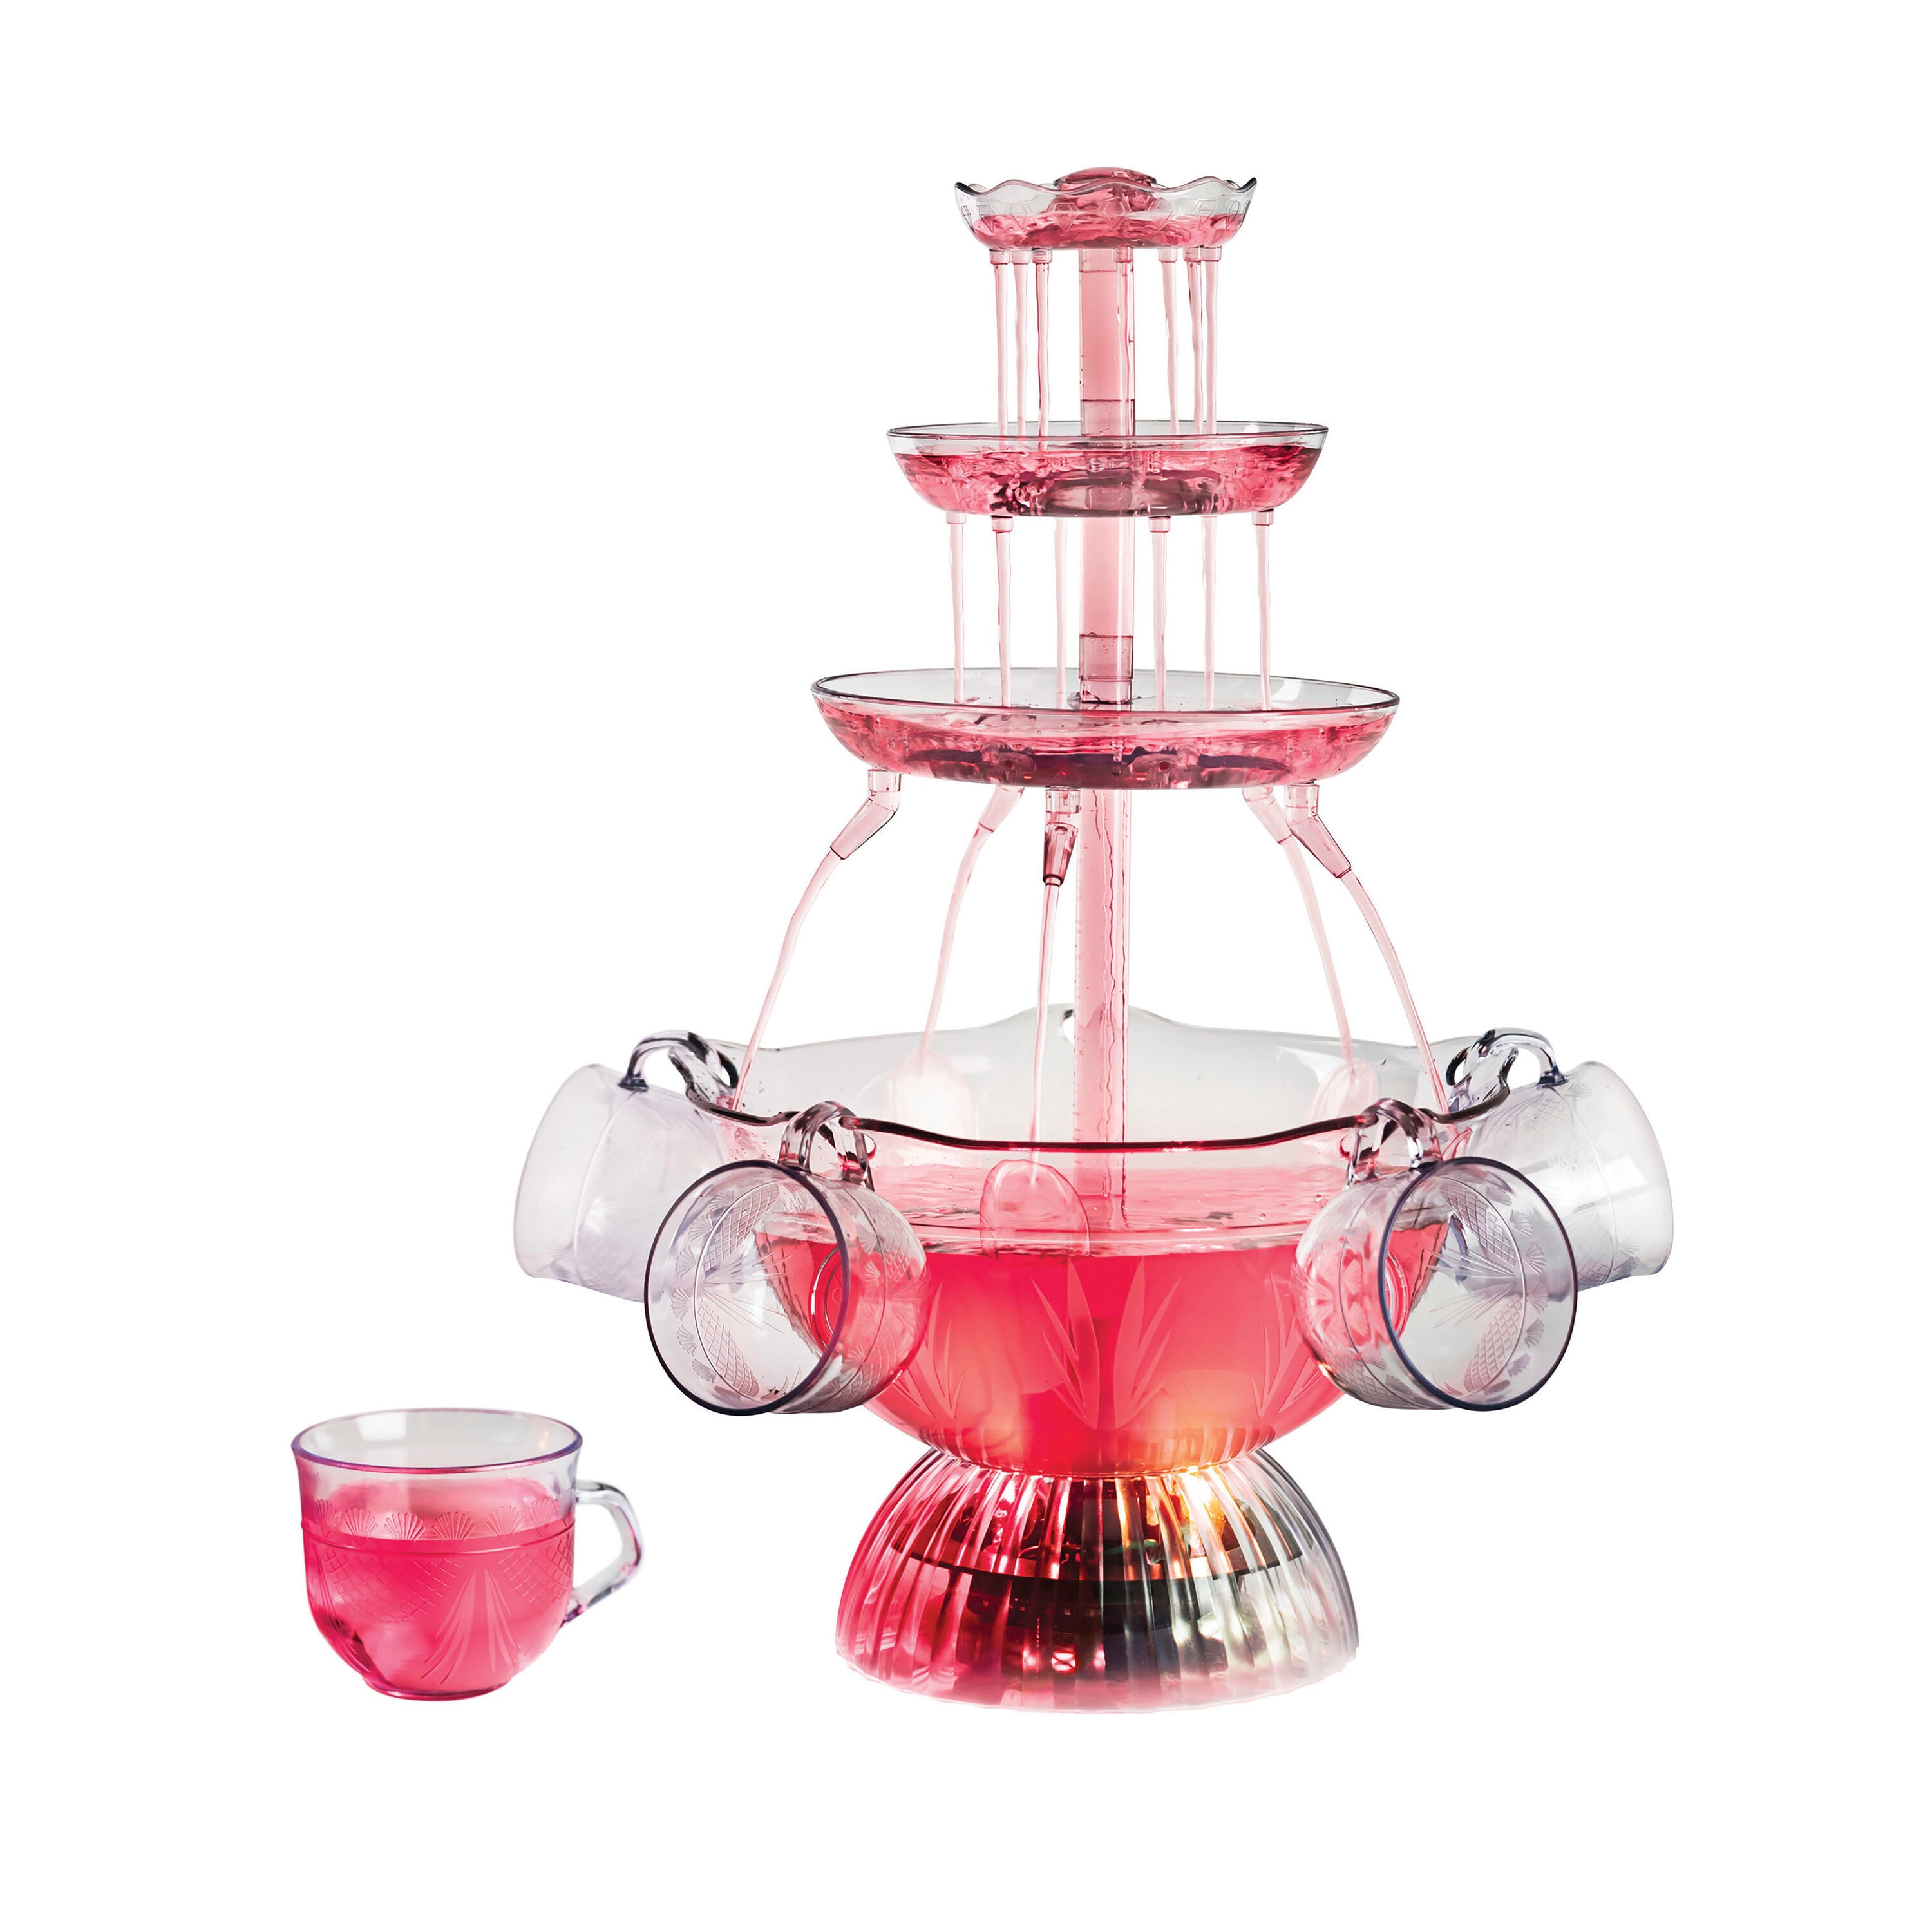 Nostalgia 3-Tier Chocolate Fondue Fountain - 24 oz Capacity - Pink  Stainless Steel - Perfect for Parties - Sweet & Savory Dipping Fun in the  Fondue Pots & Fountains department at